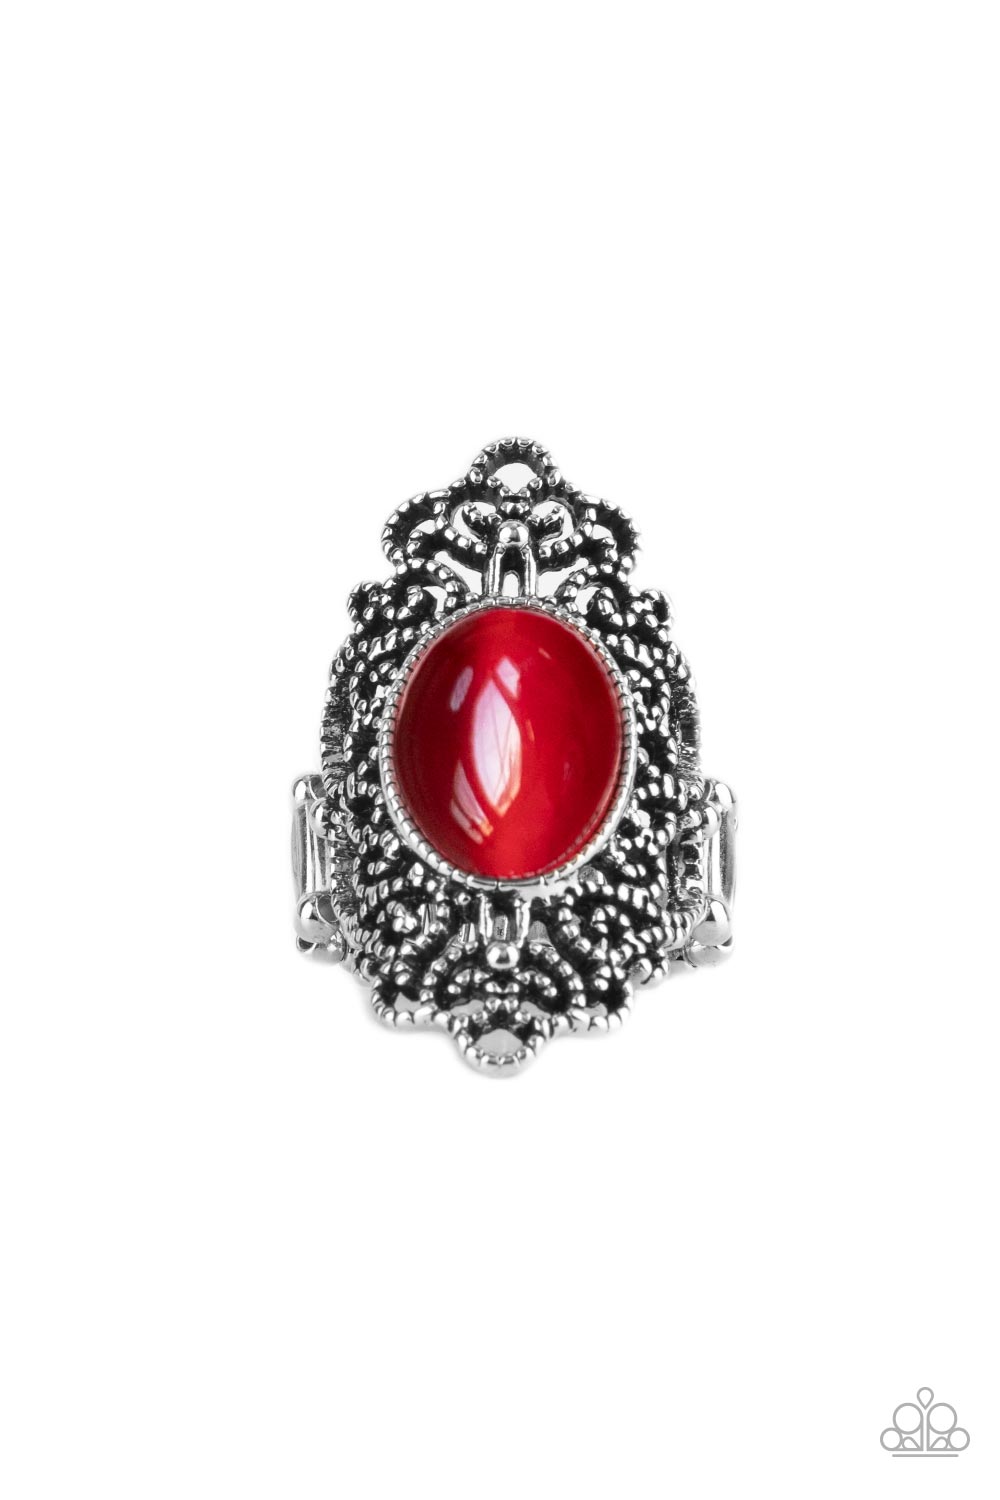 Once Upon a Meadow - Red Paparazzi Accessories - VJ Bedazzled Jewelry